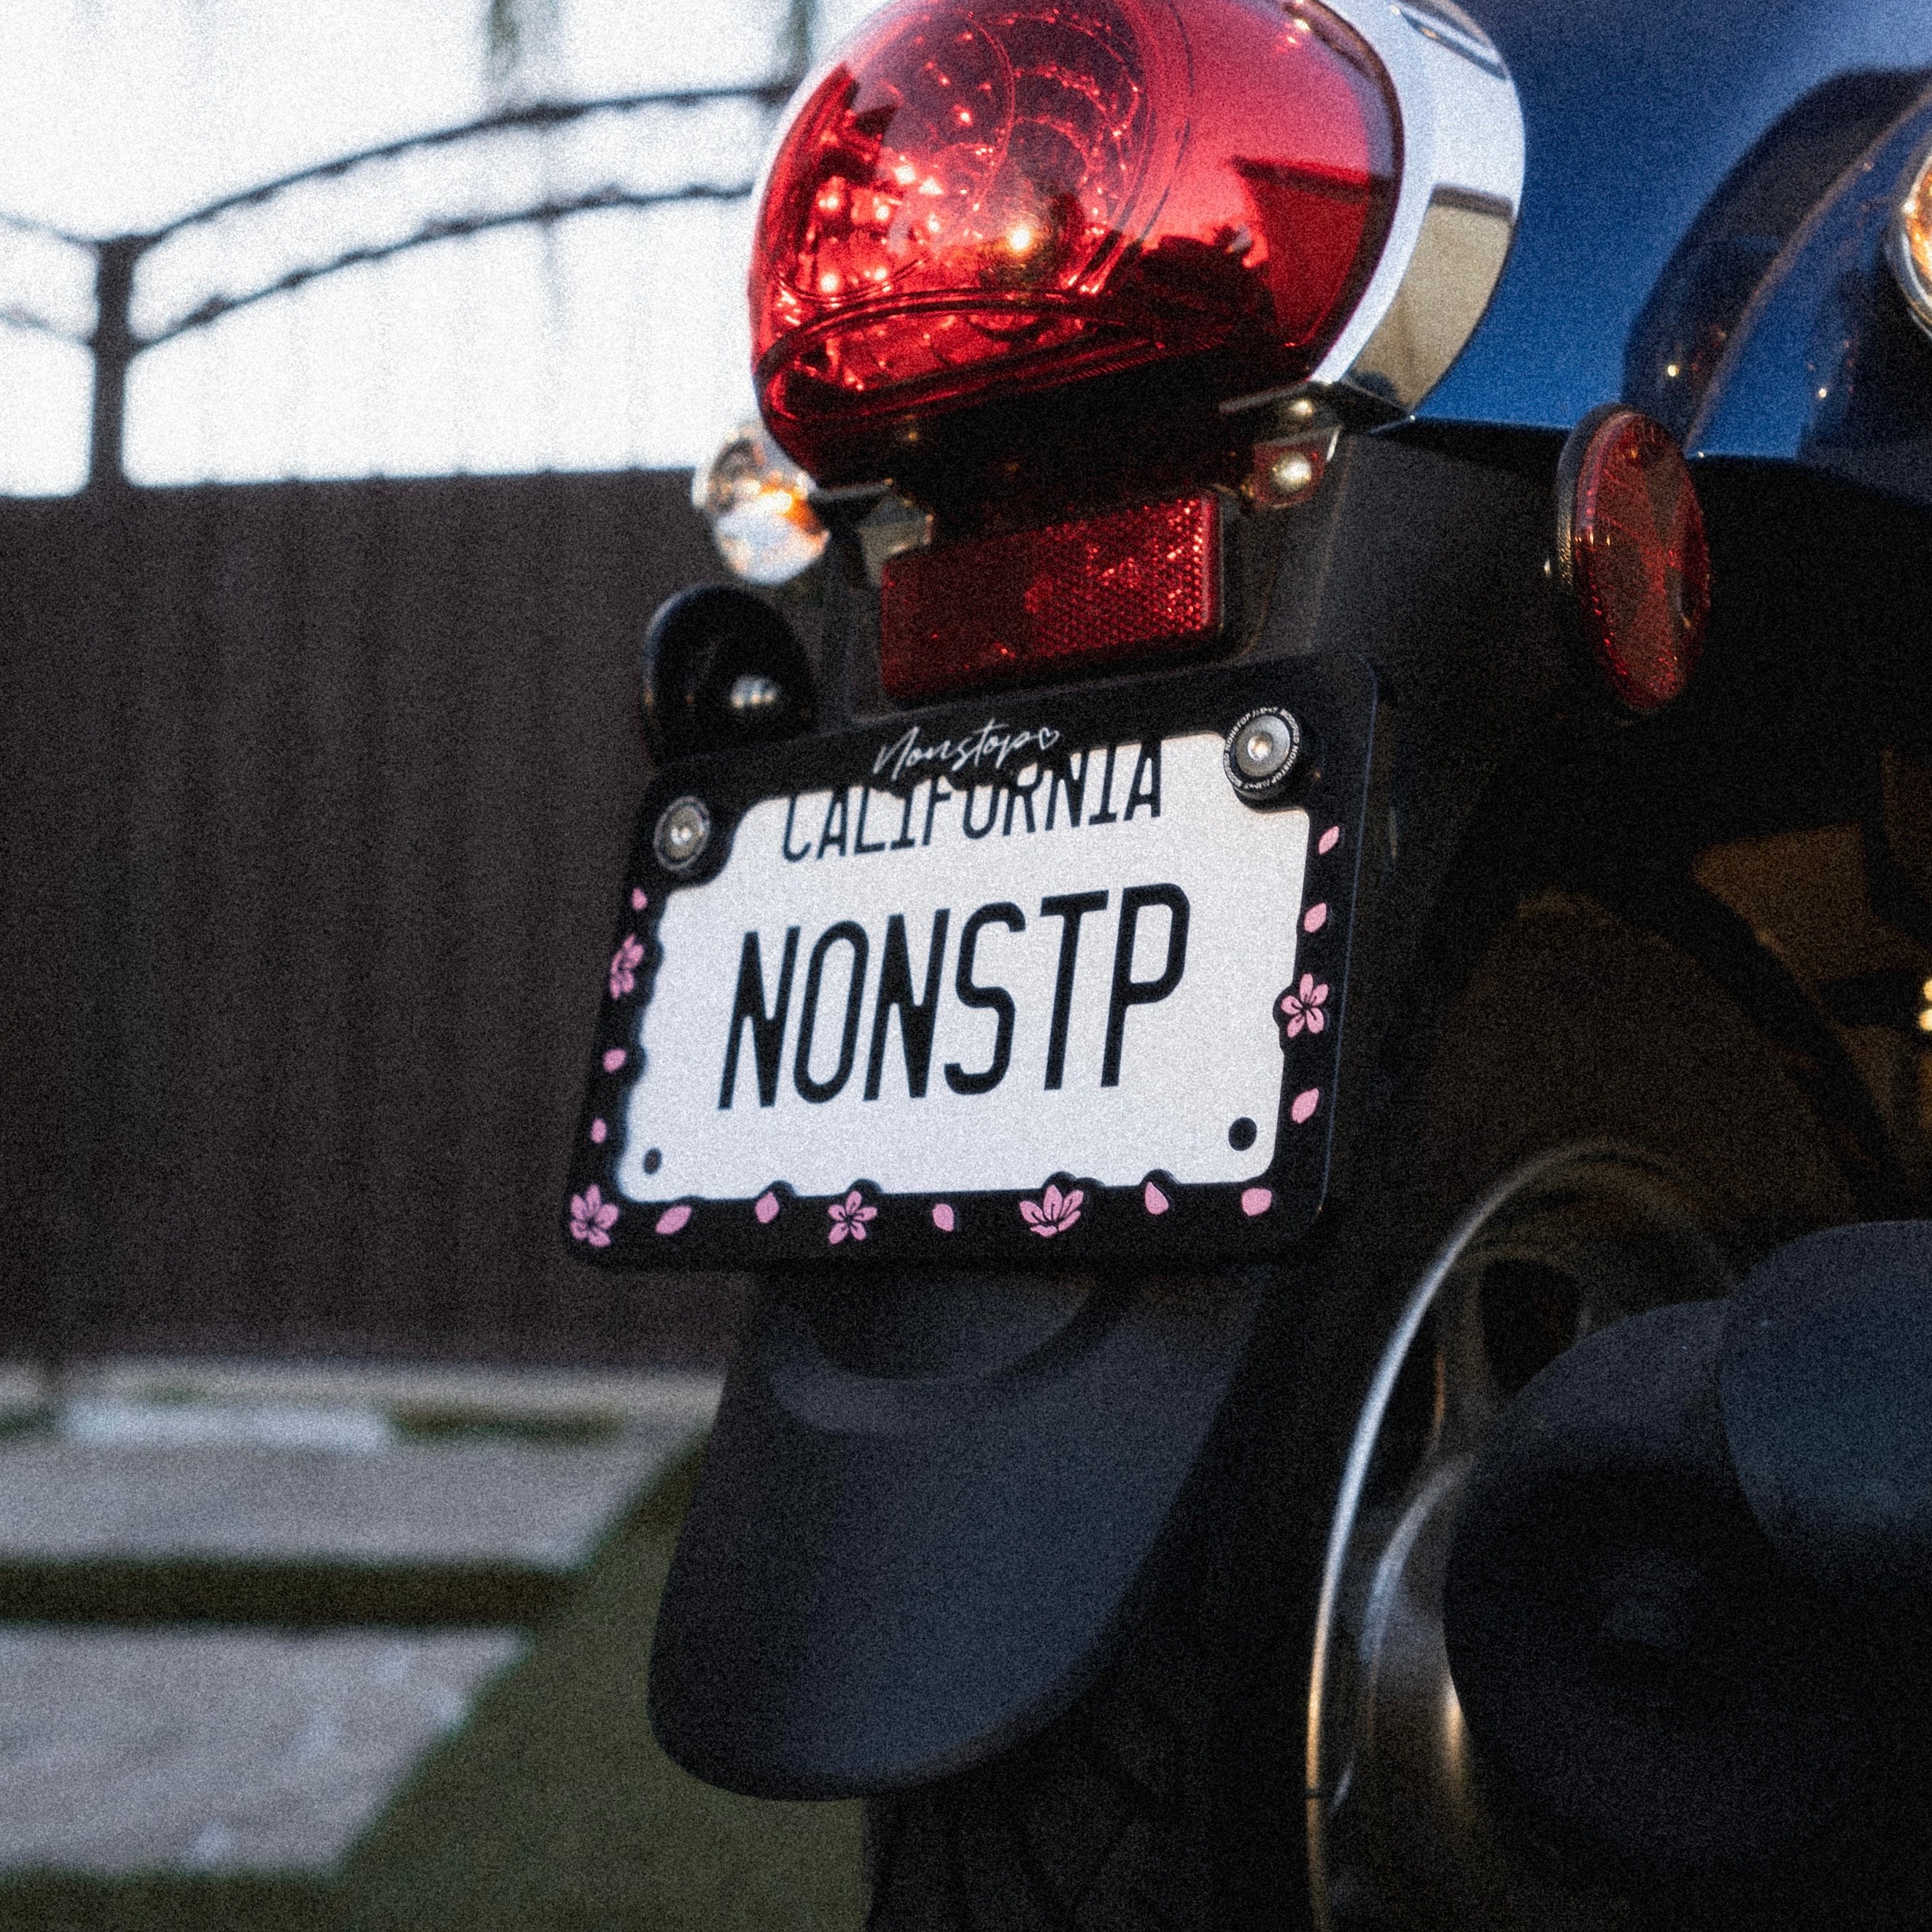 Cherry Blossom Motorcycle License Plate Frame